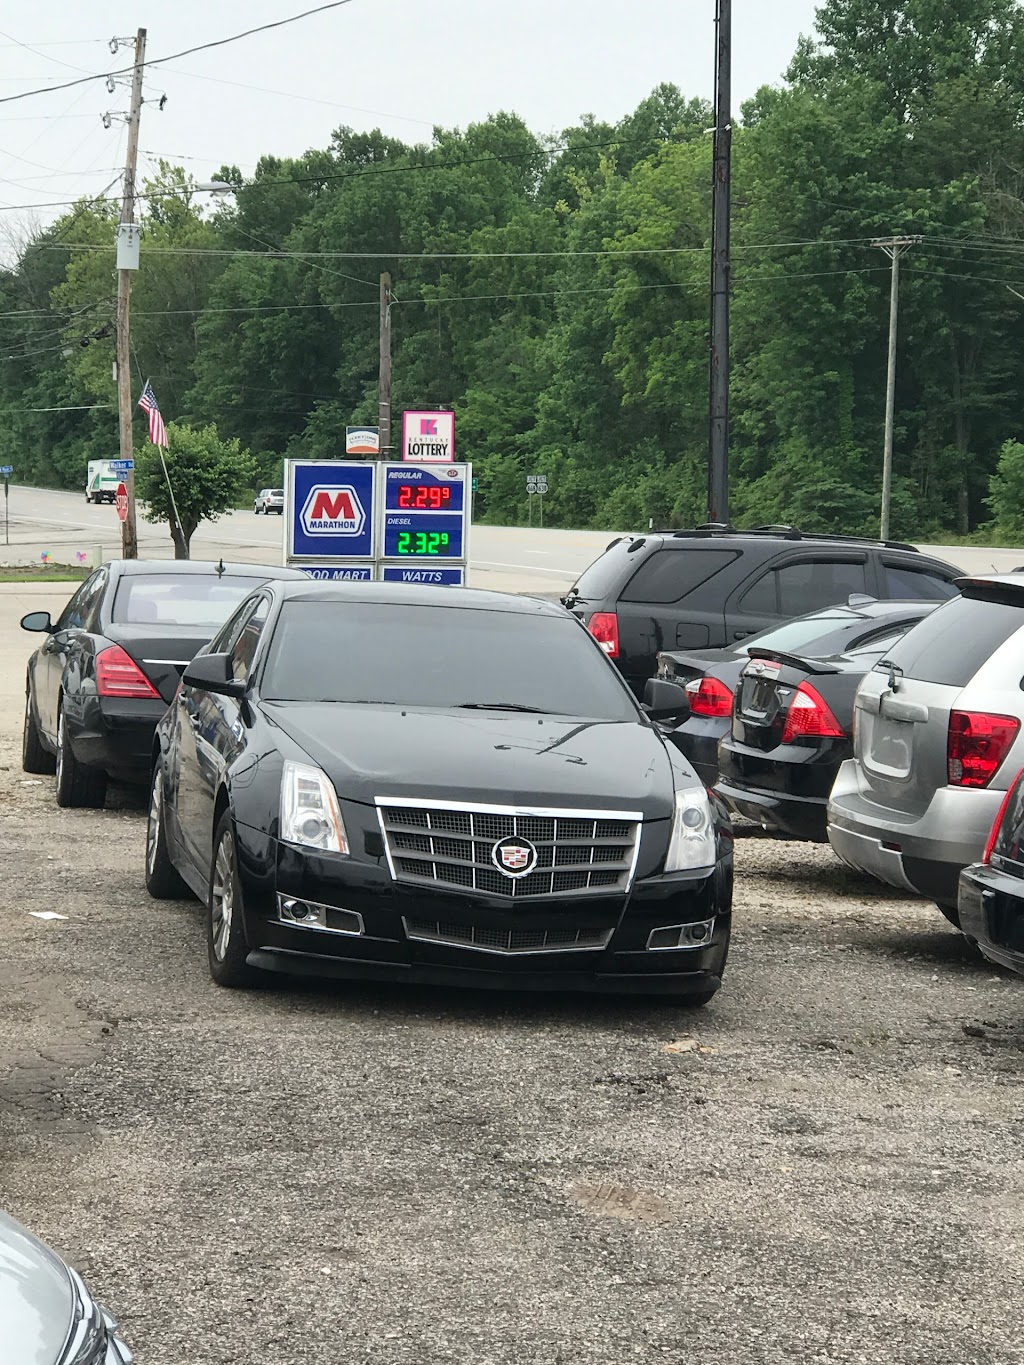 Fowler Auto Sales | 308 North Dixie Hwy, Muldraugh, KY 40155 | Phone: (502) 799-7888